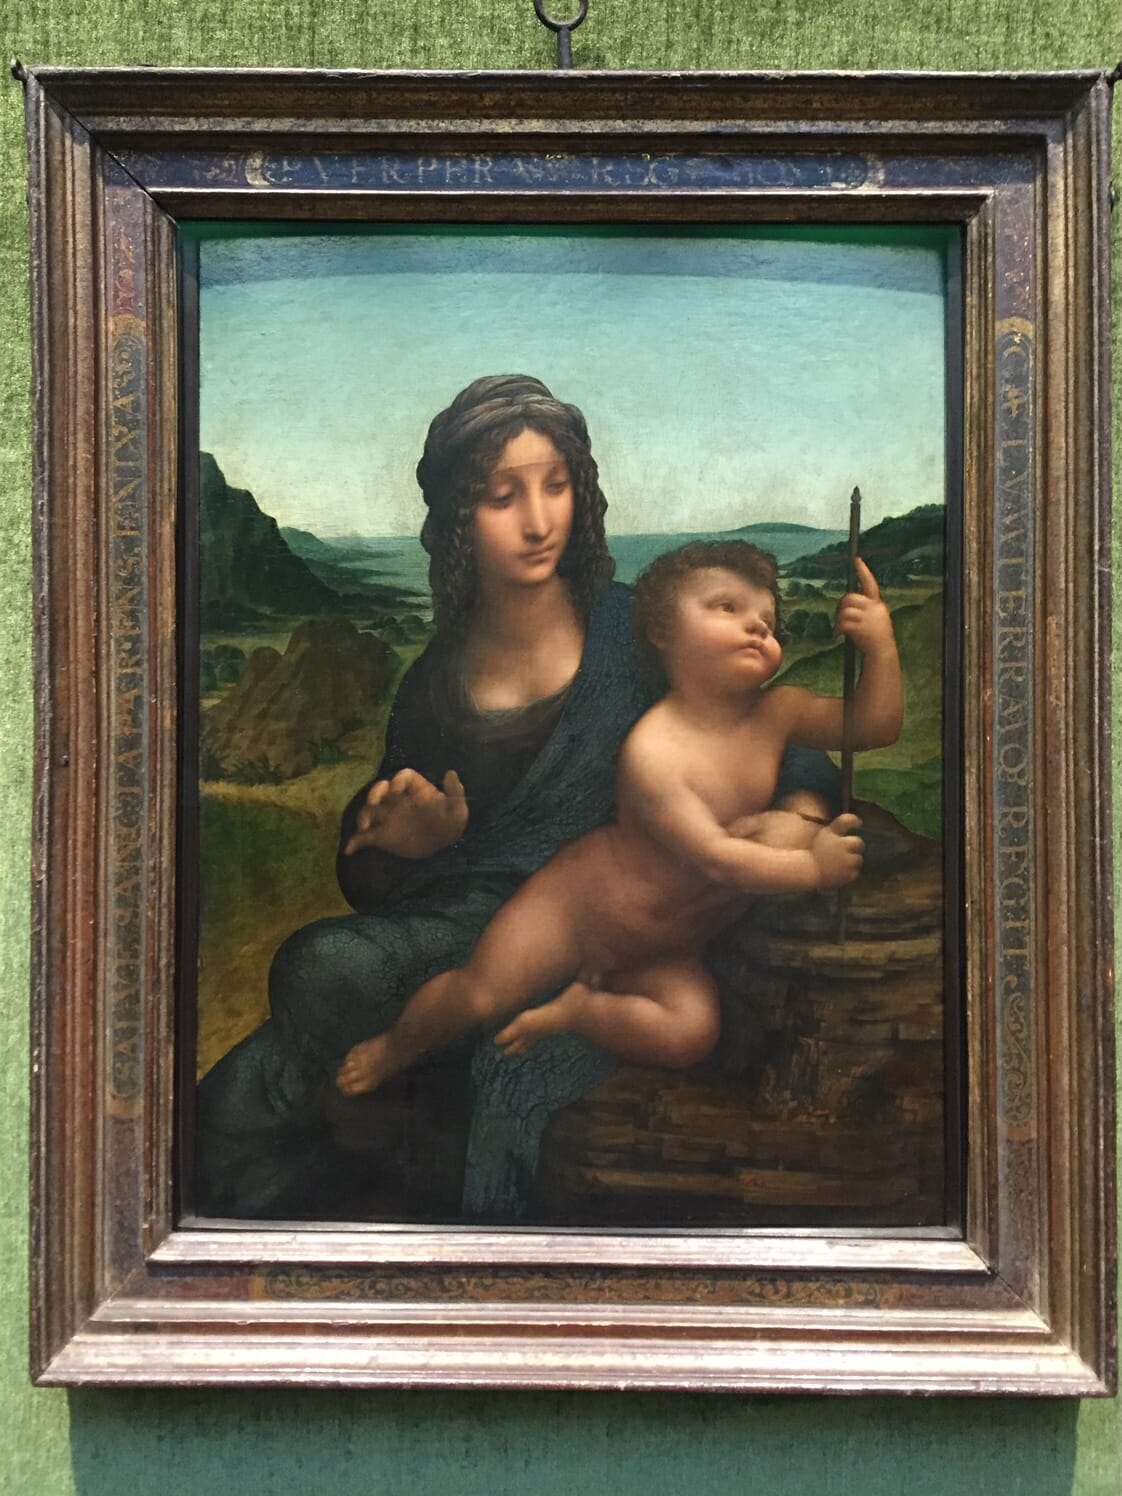 the Madonna of the Yarnwinder painting, by Leonard da Vinci, at the Scottish National Gallery in Edinburgh